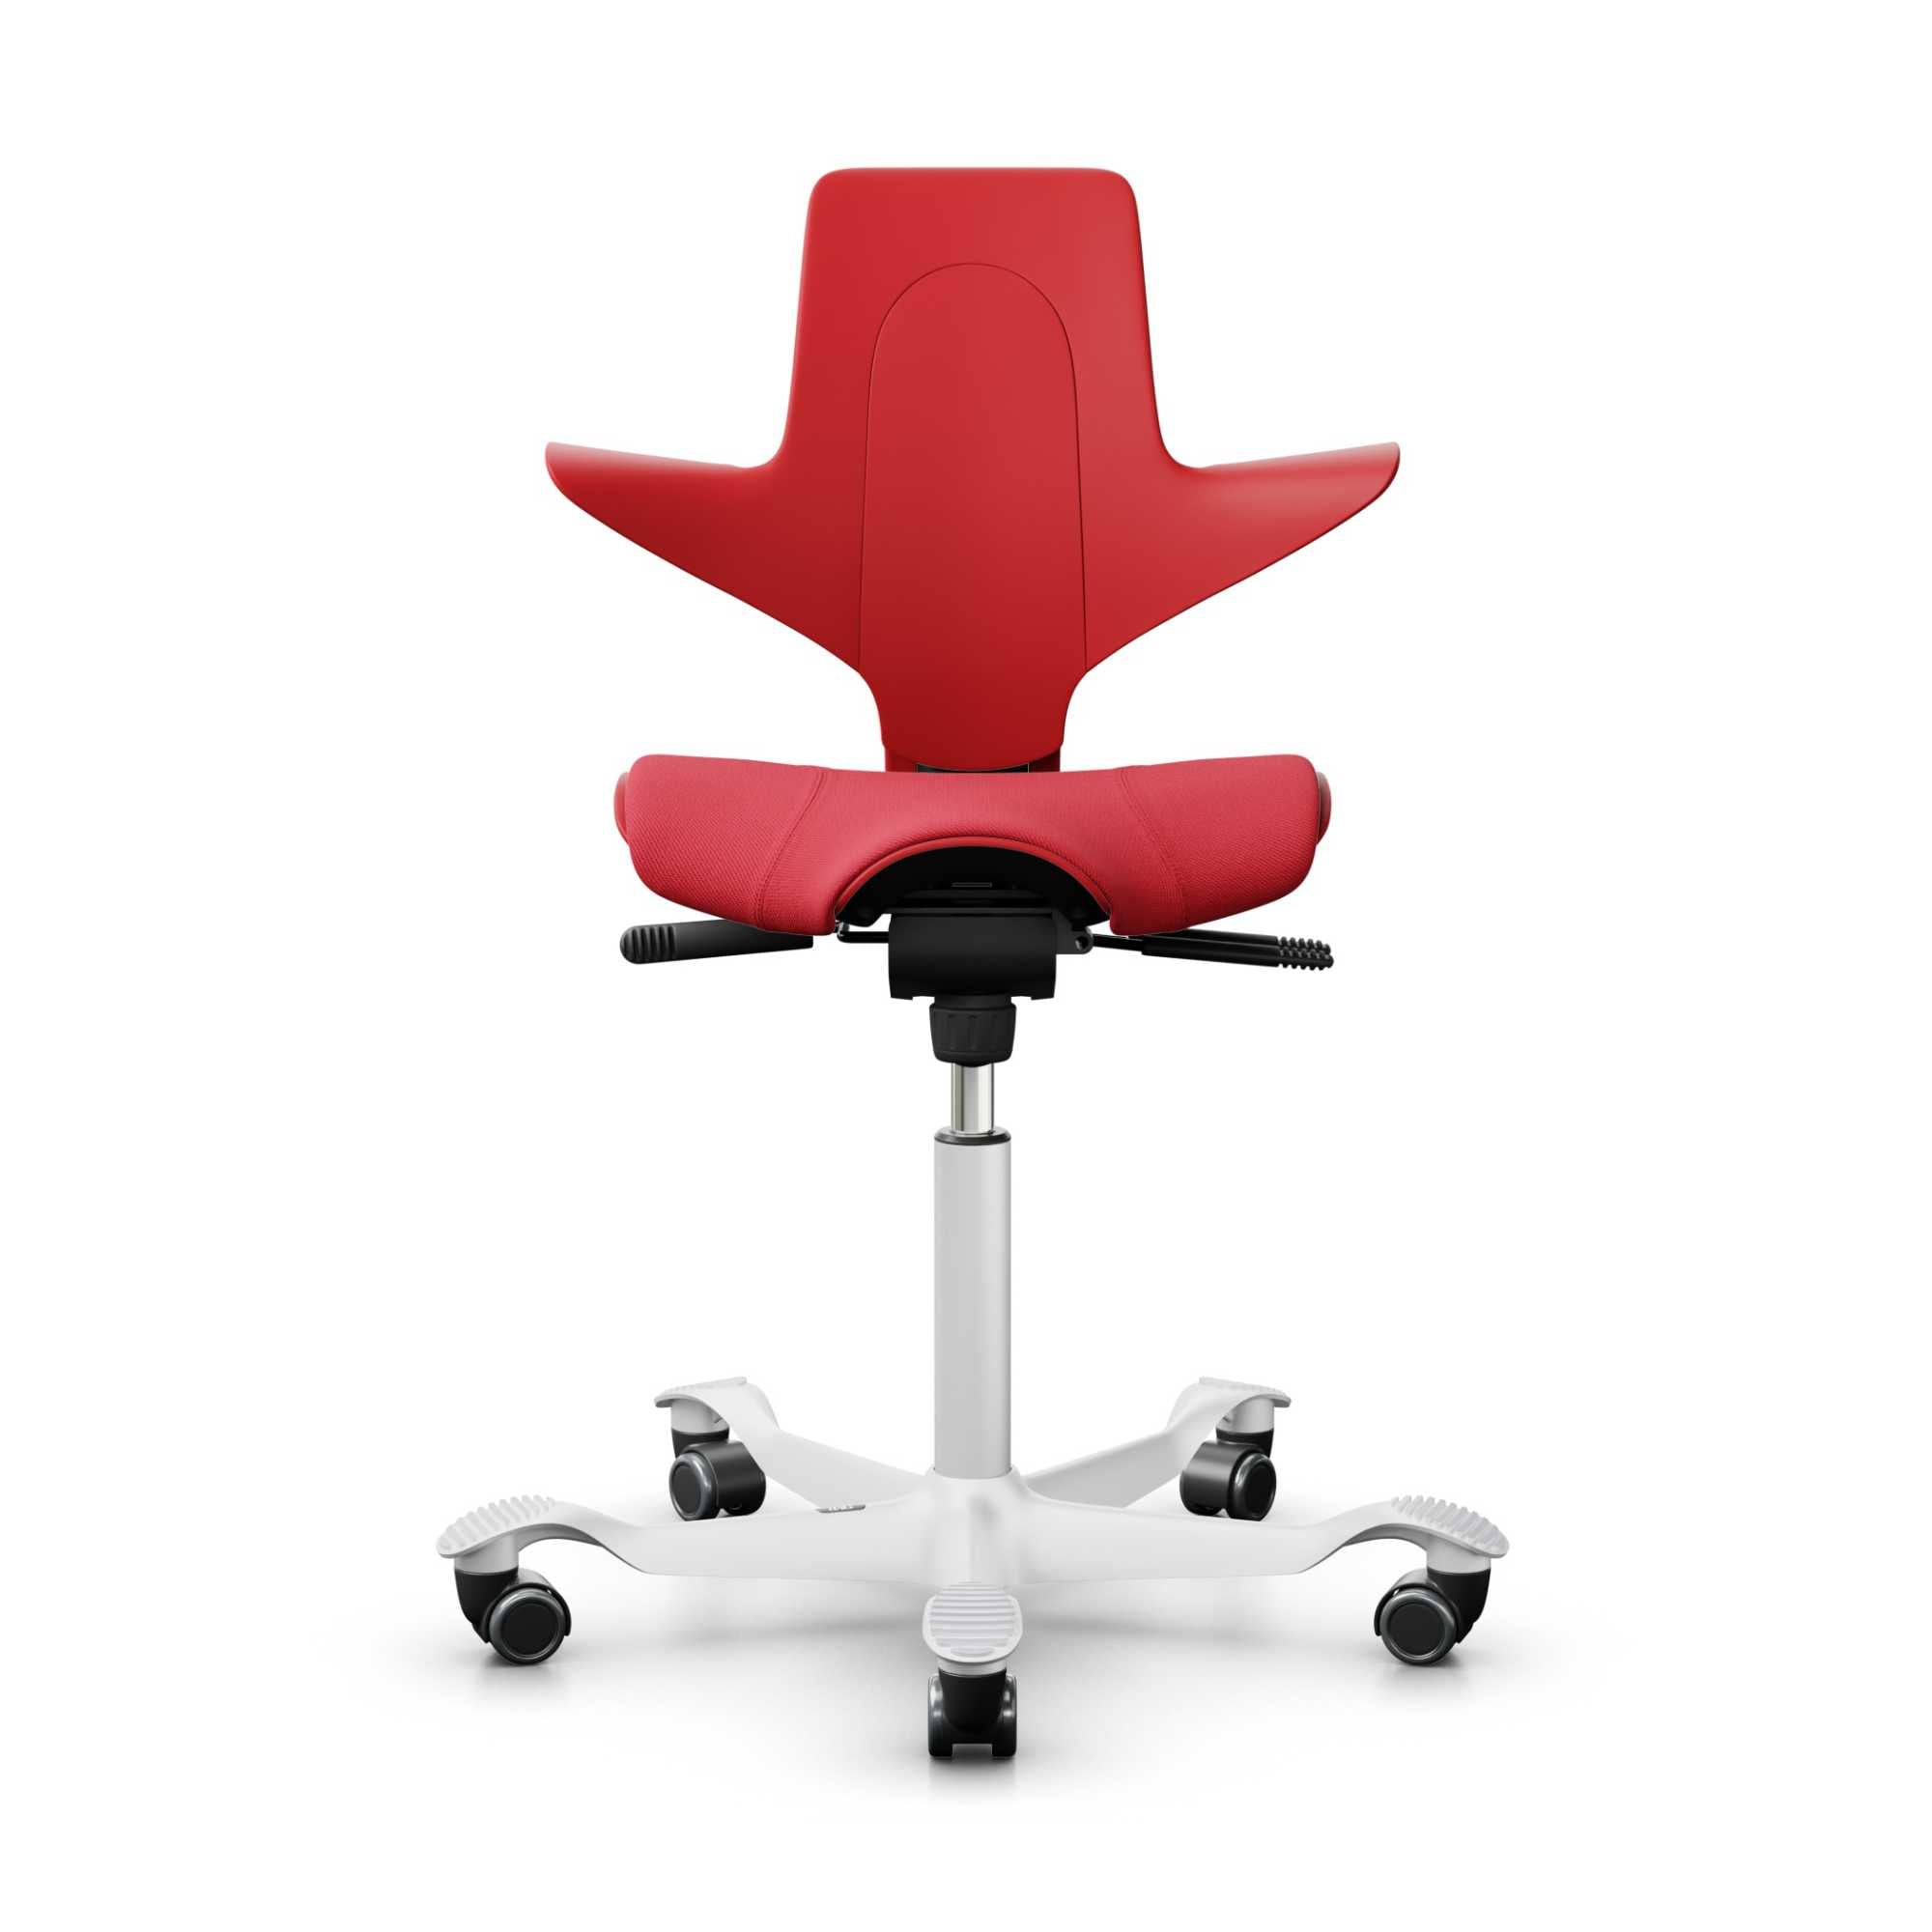 HAG Capisco Puls 8020 ergonomic chair, red/silver/red (200 mm)